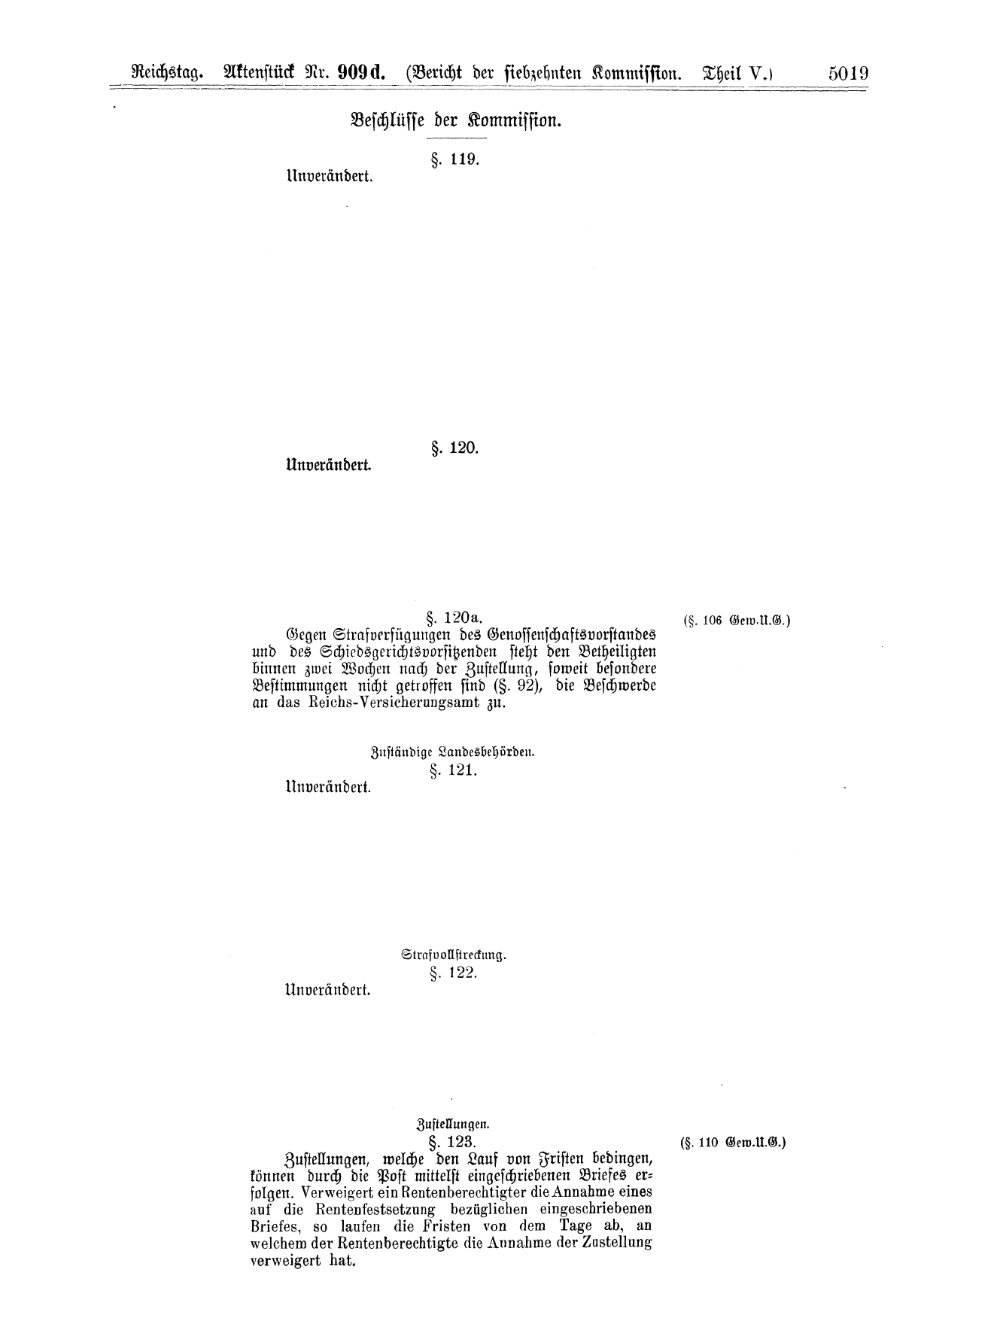 Scan of page 5019